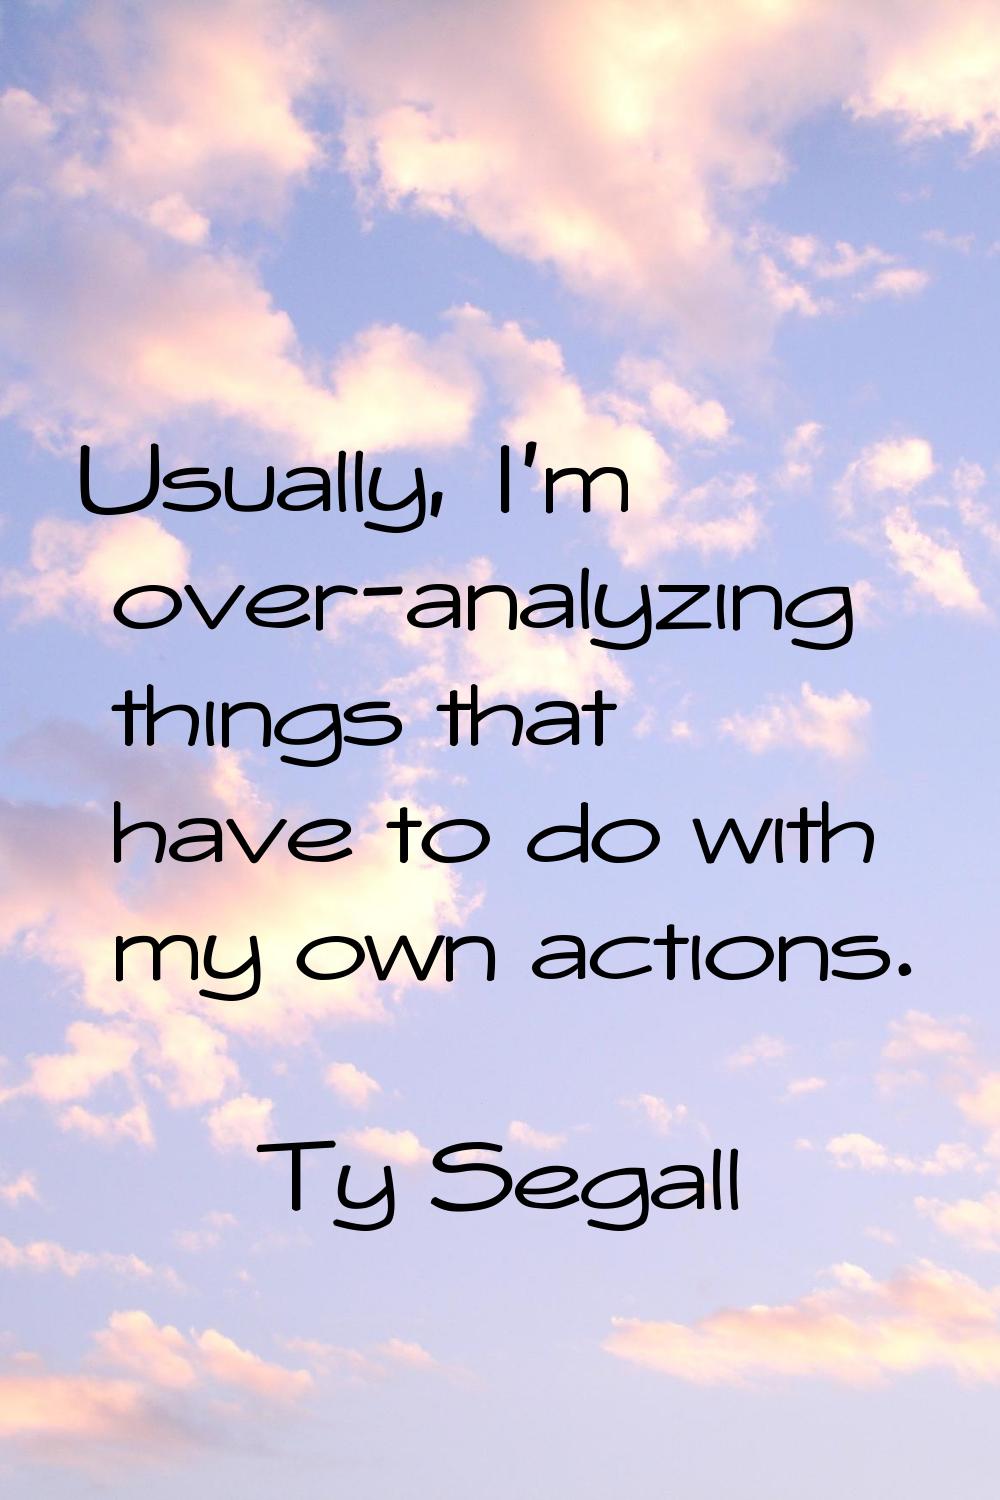 Usually, I'm over-analyzing things that have to do with my own actions.